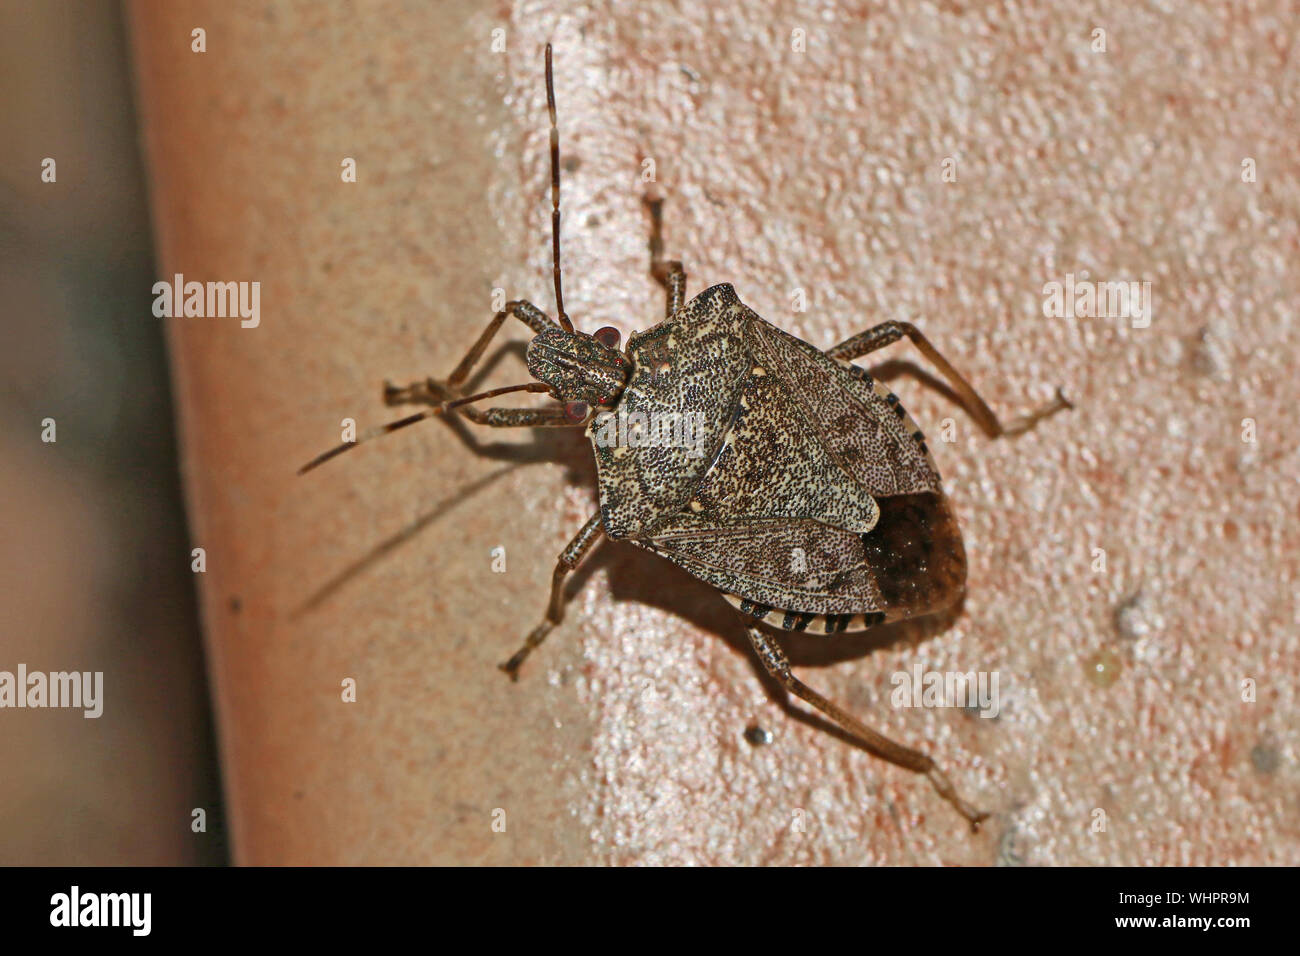 brown marmorated stink bug Latin halyomorpha halys from the pentatomidae family on a tile surface in Italy a serious pest in Europe and the USA Stock Photo